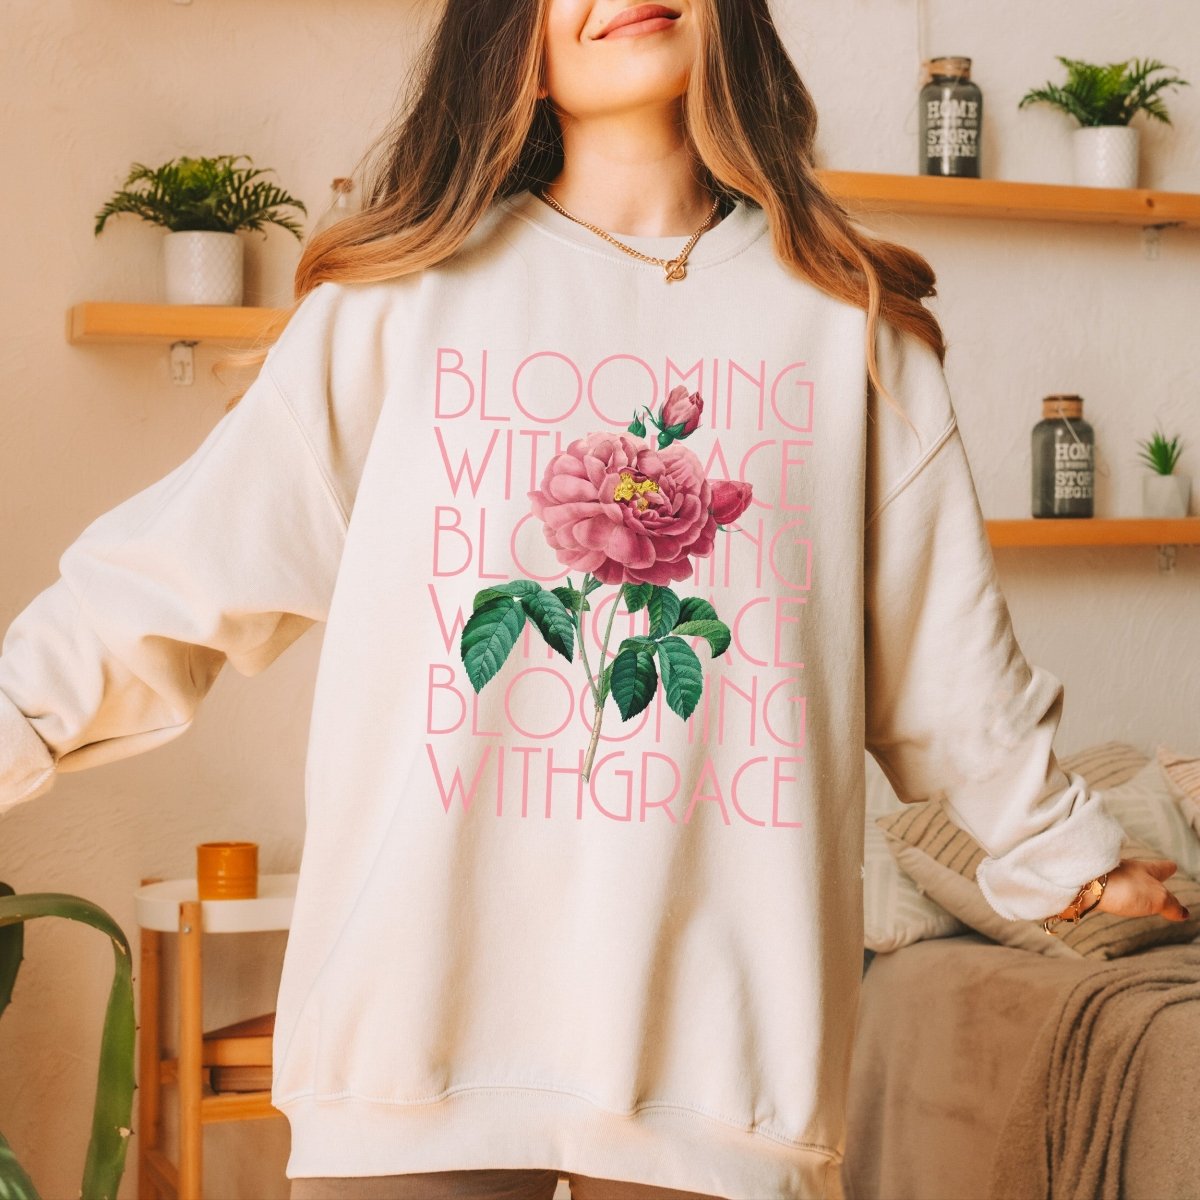 Blooming with Grace Wholesale Crew Sweatshirt - Limeberry Designs